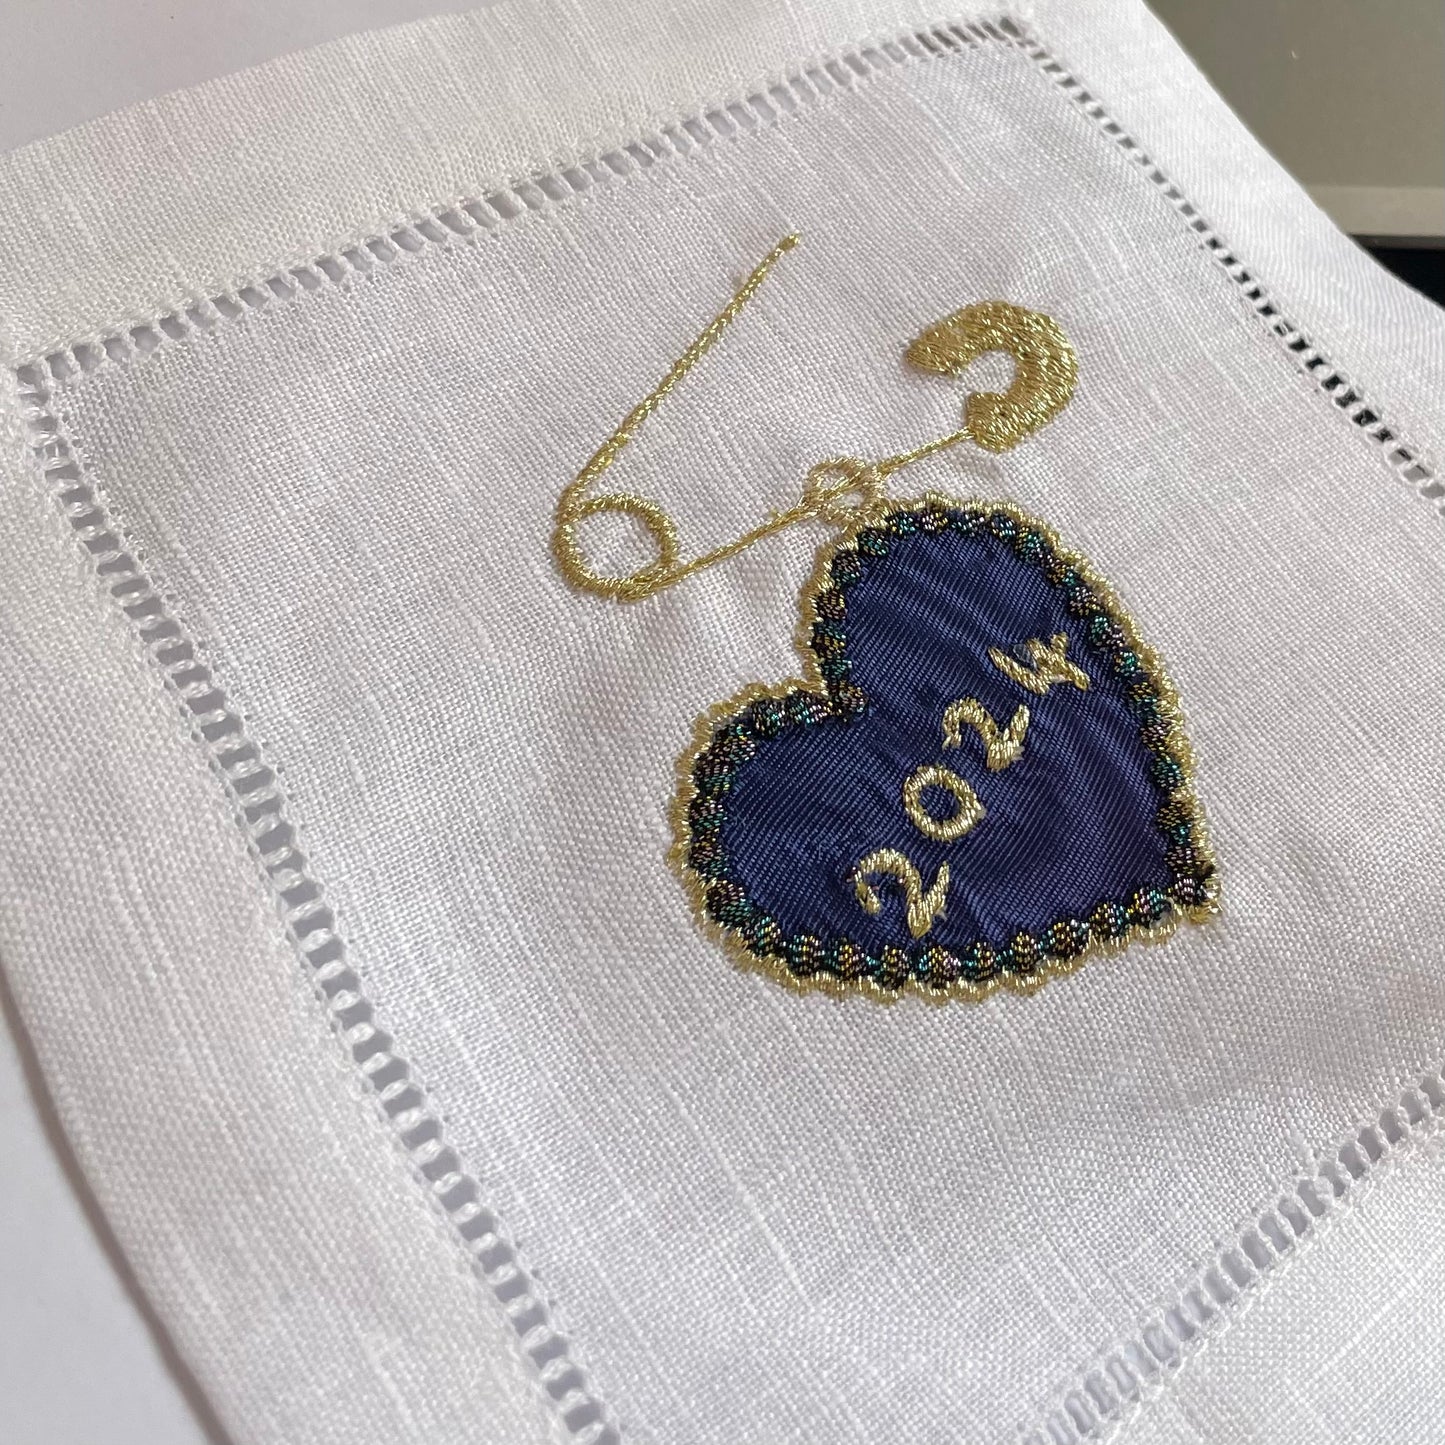 Close-up of embroidered date heart and pin charm in navy blue